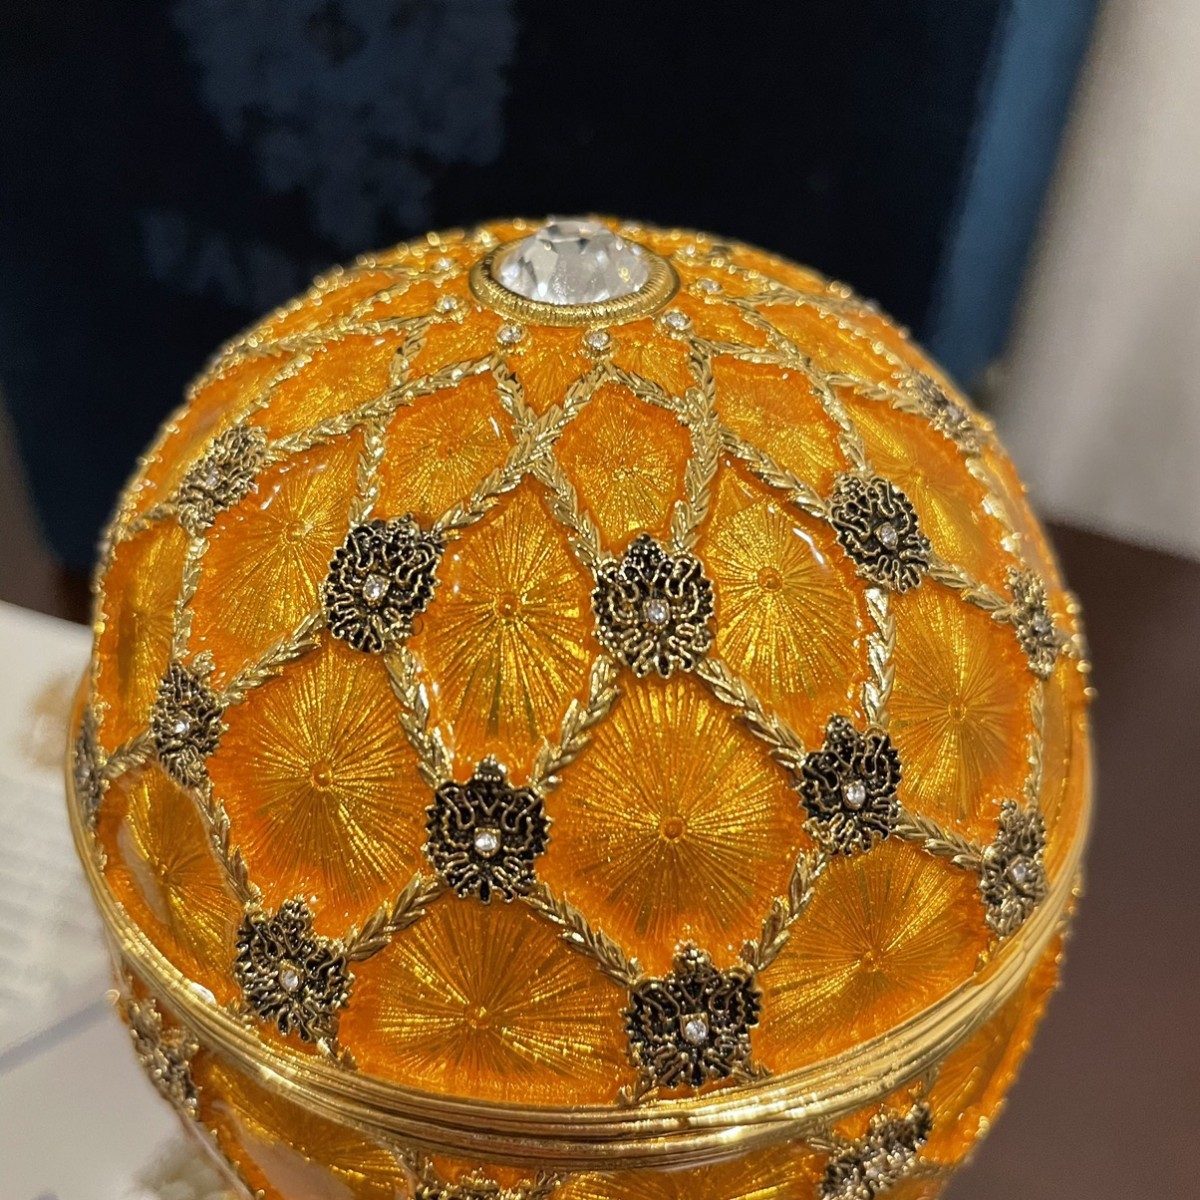 Jewelry - Faberge Imperial Coronation Egg {AUTHENTIC REPLICA} - 5